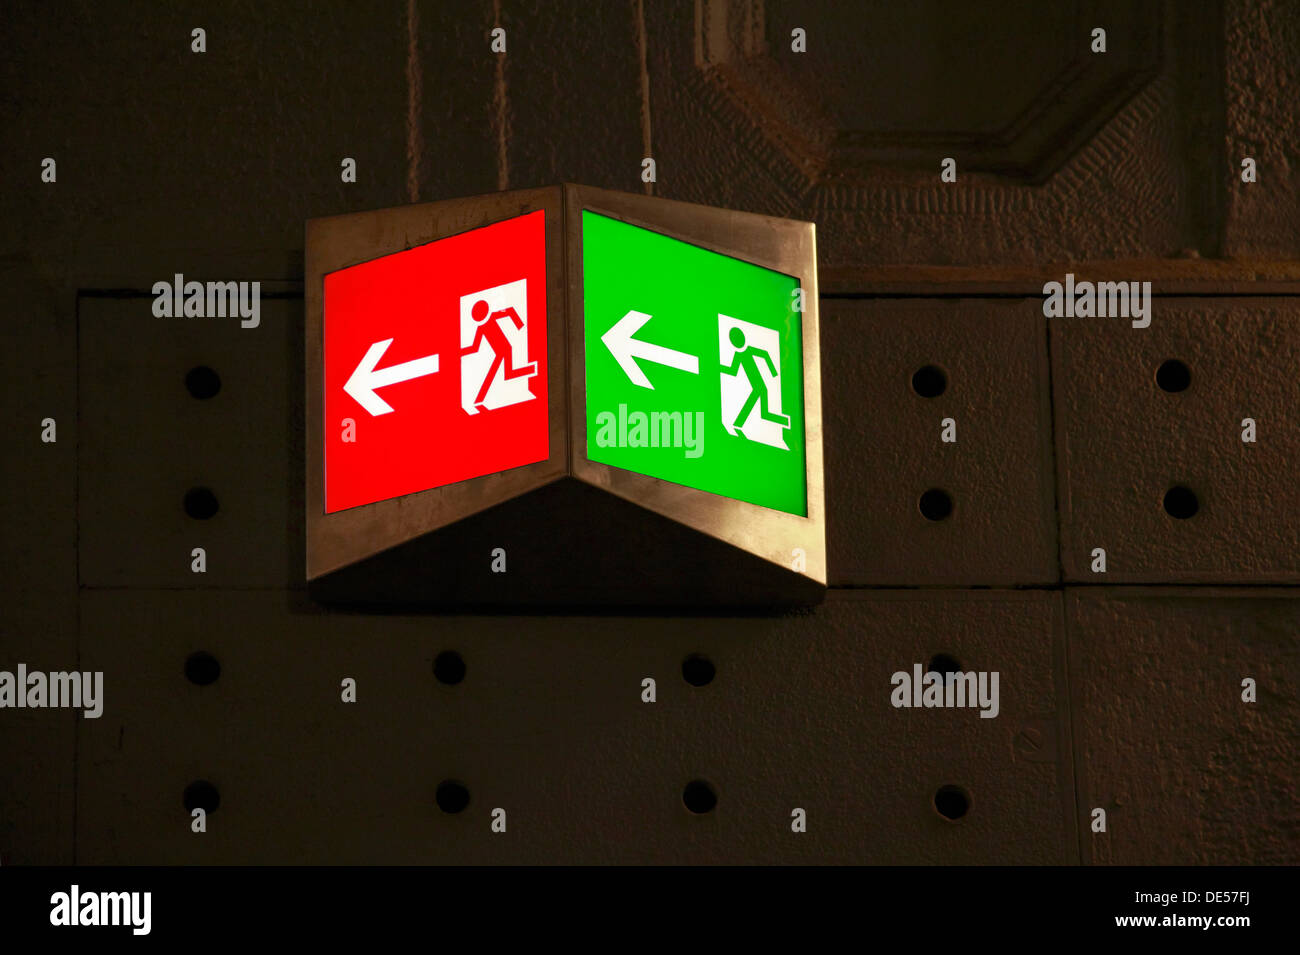 Emergency exit sign, illuminated pictograms, green and red, strange colour, fire prevention, evacuation route Stock Photo